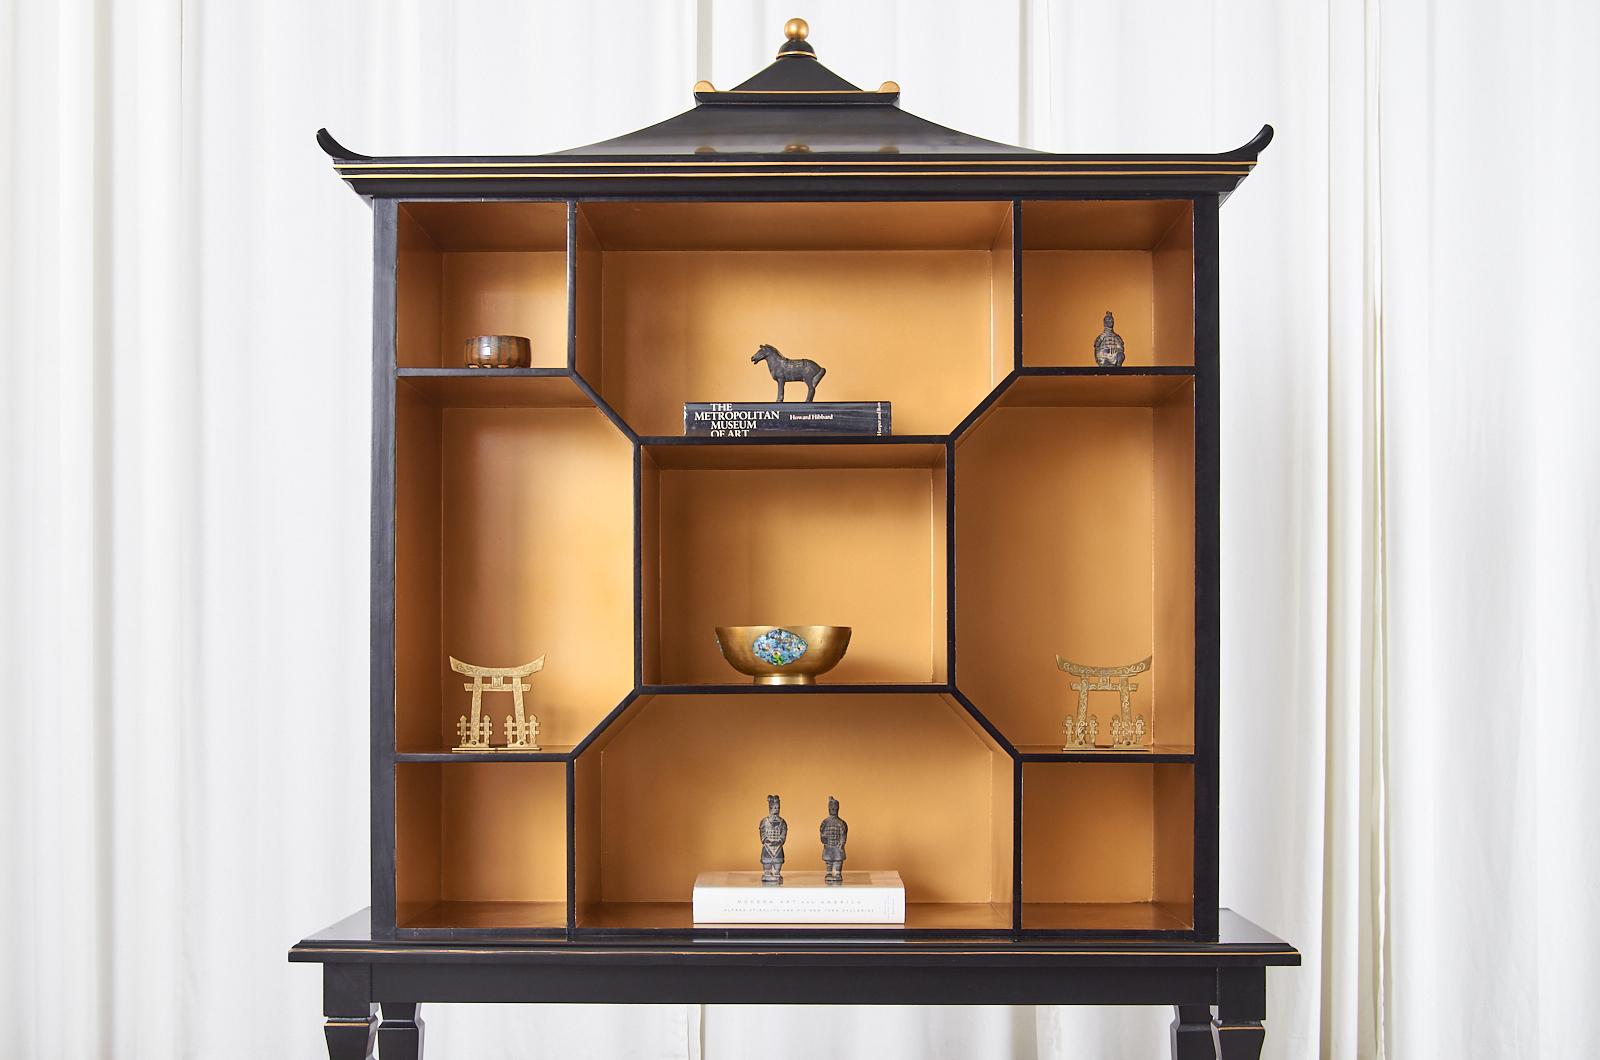 Contemporary Chinese two-part bookshelf, etagere, or store display shelves featuring an Asian pagoda top. Finished in a dramatic black lacquer ebony with parcel gilt accents and interior. The top is fitted with shelves or cubbies measuring 14.5